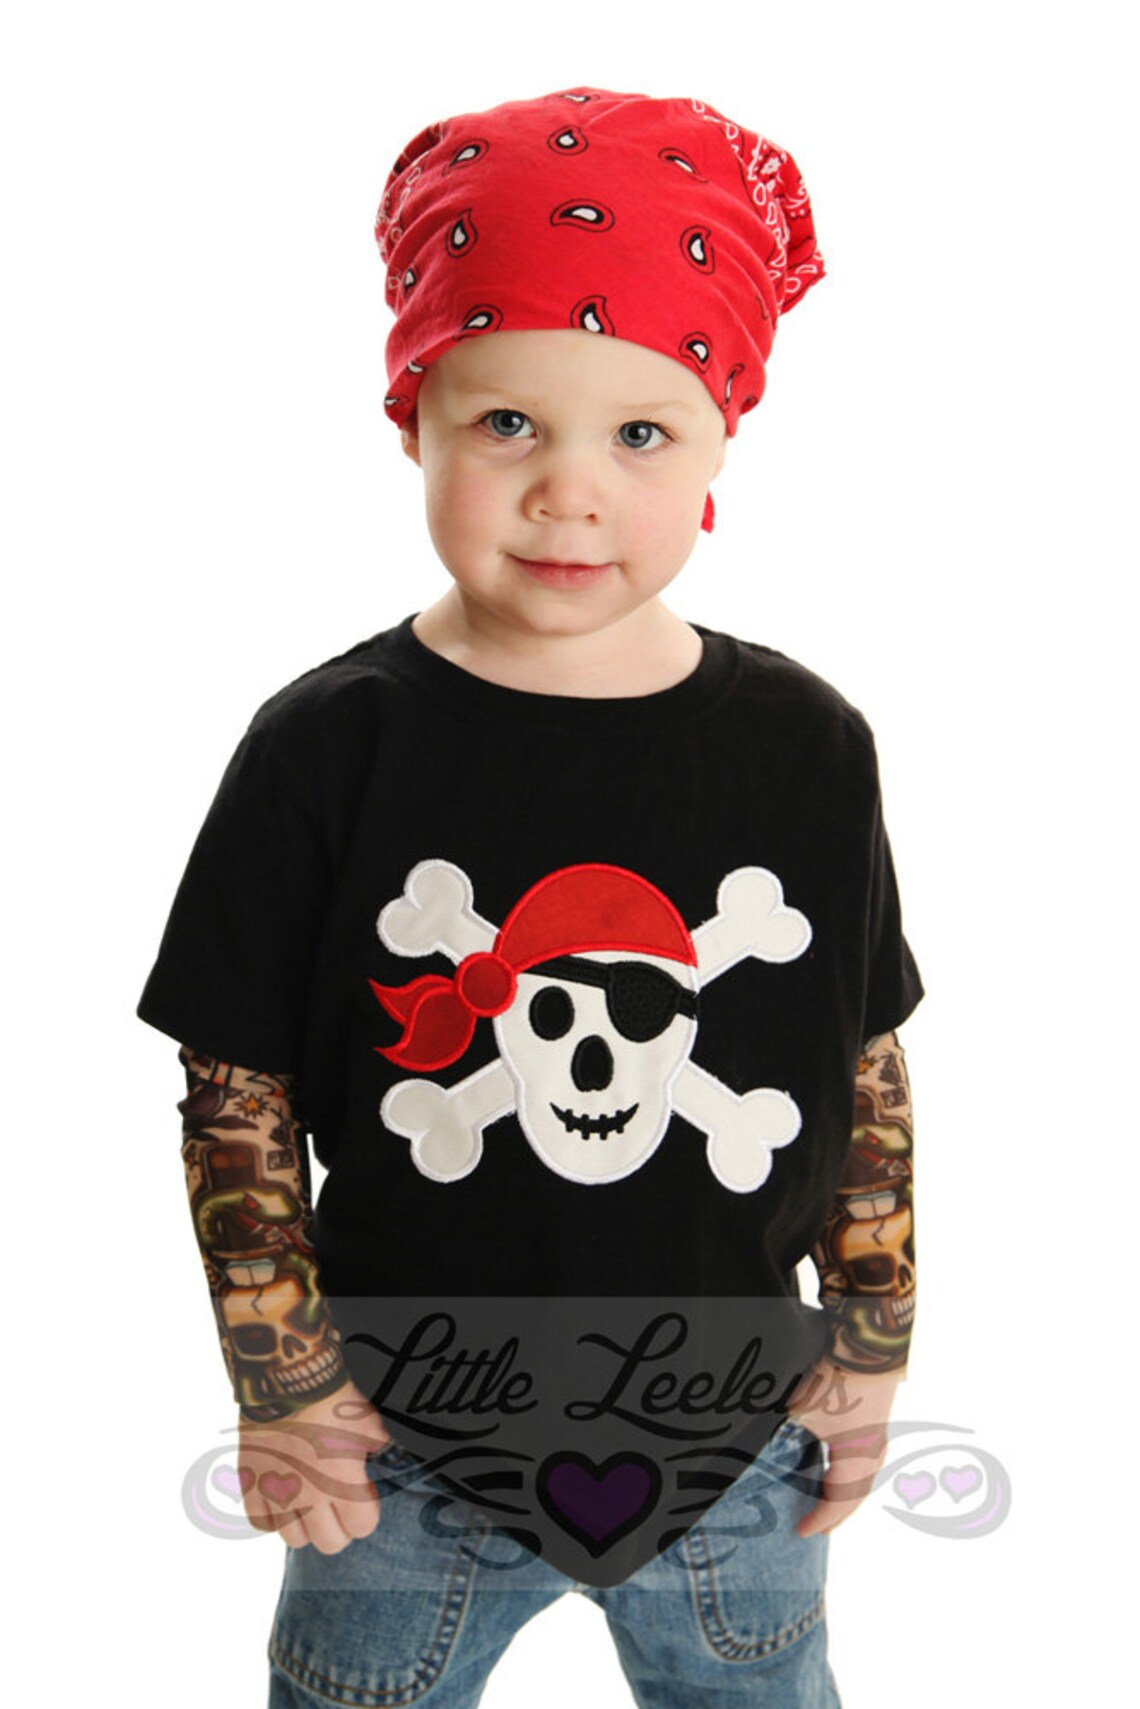 Tattoo Sleeve Shirt With Pirate Skull Applique for Infants & | Etsy